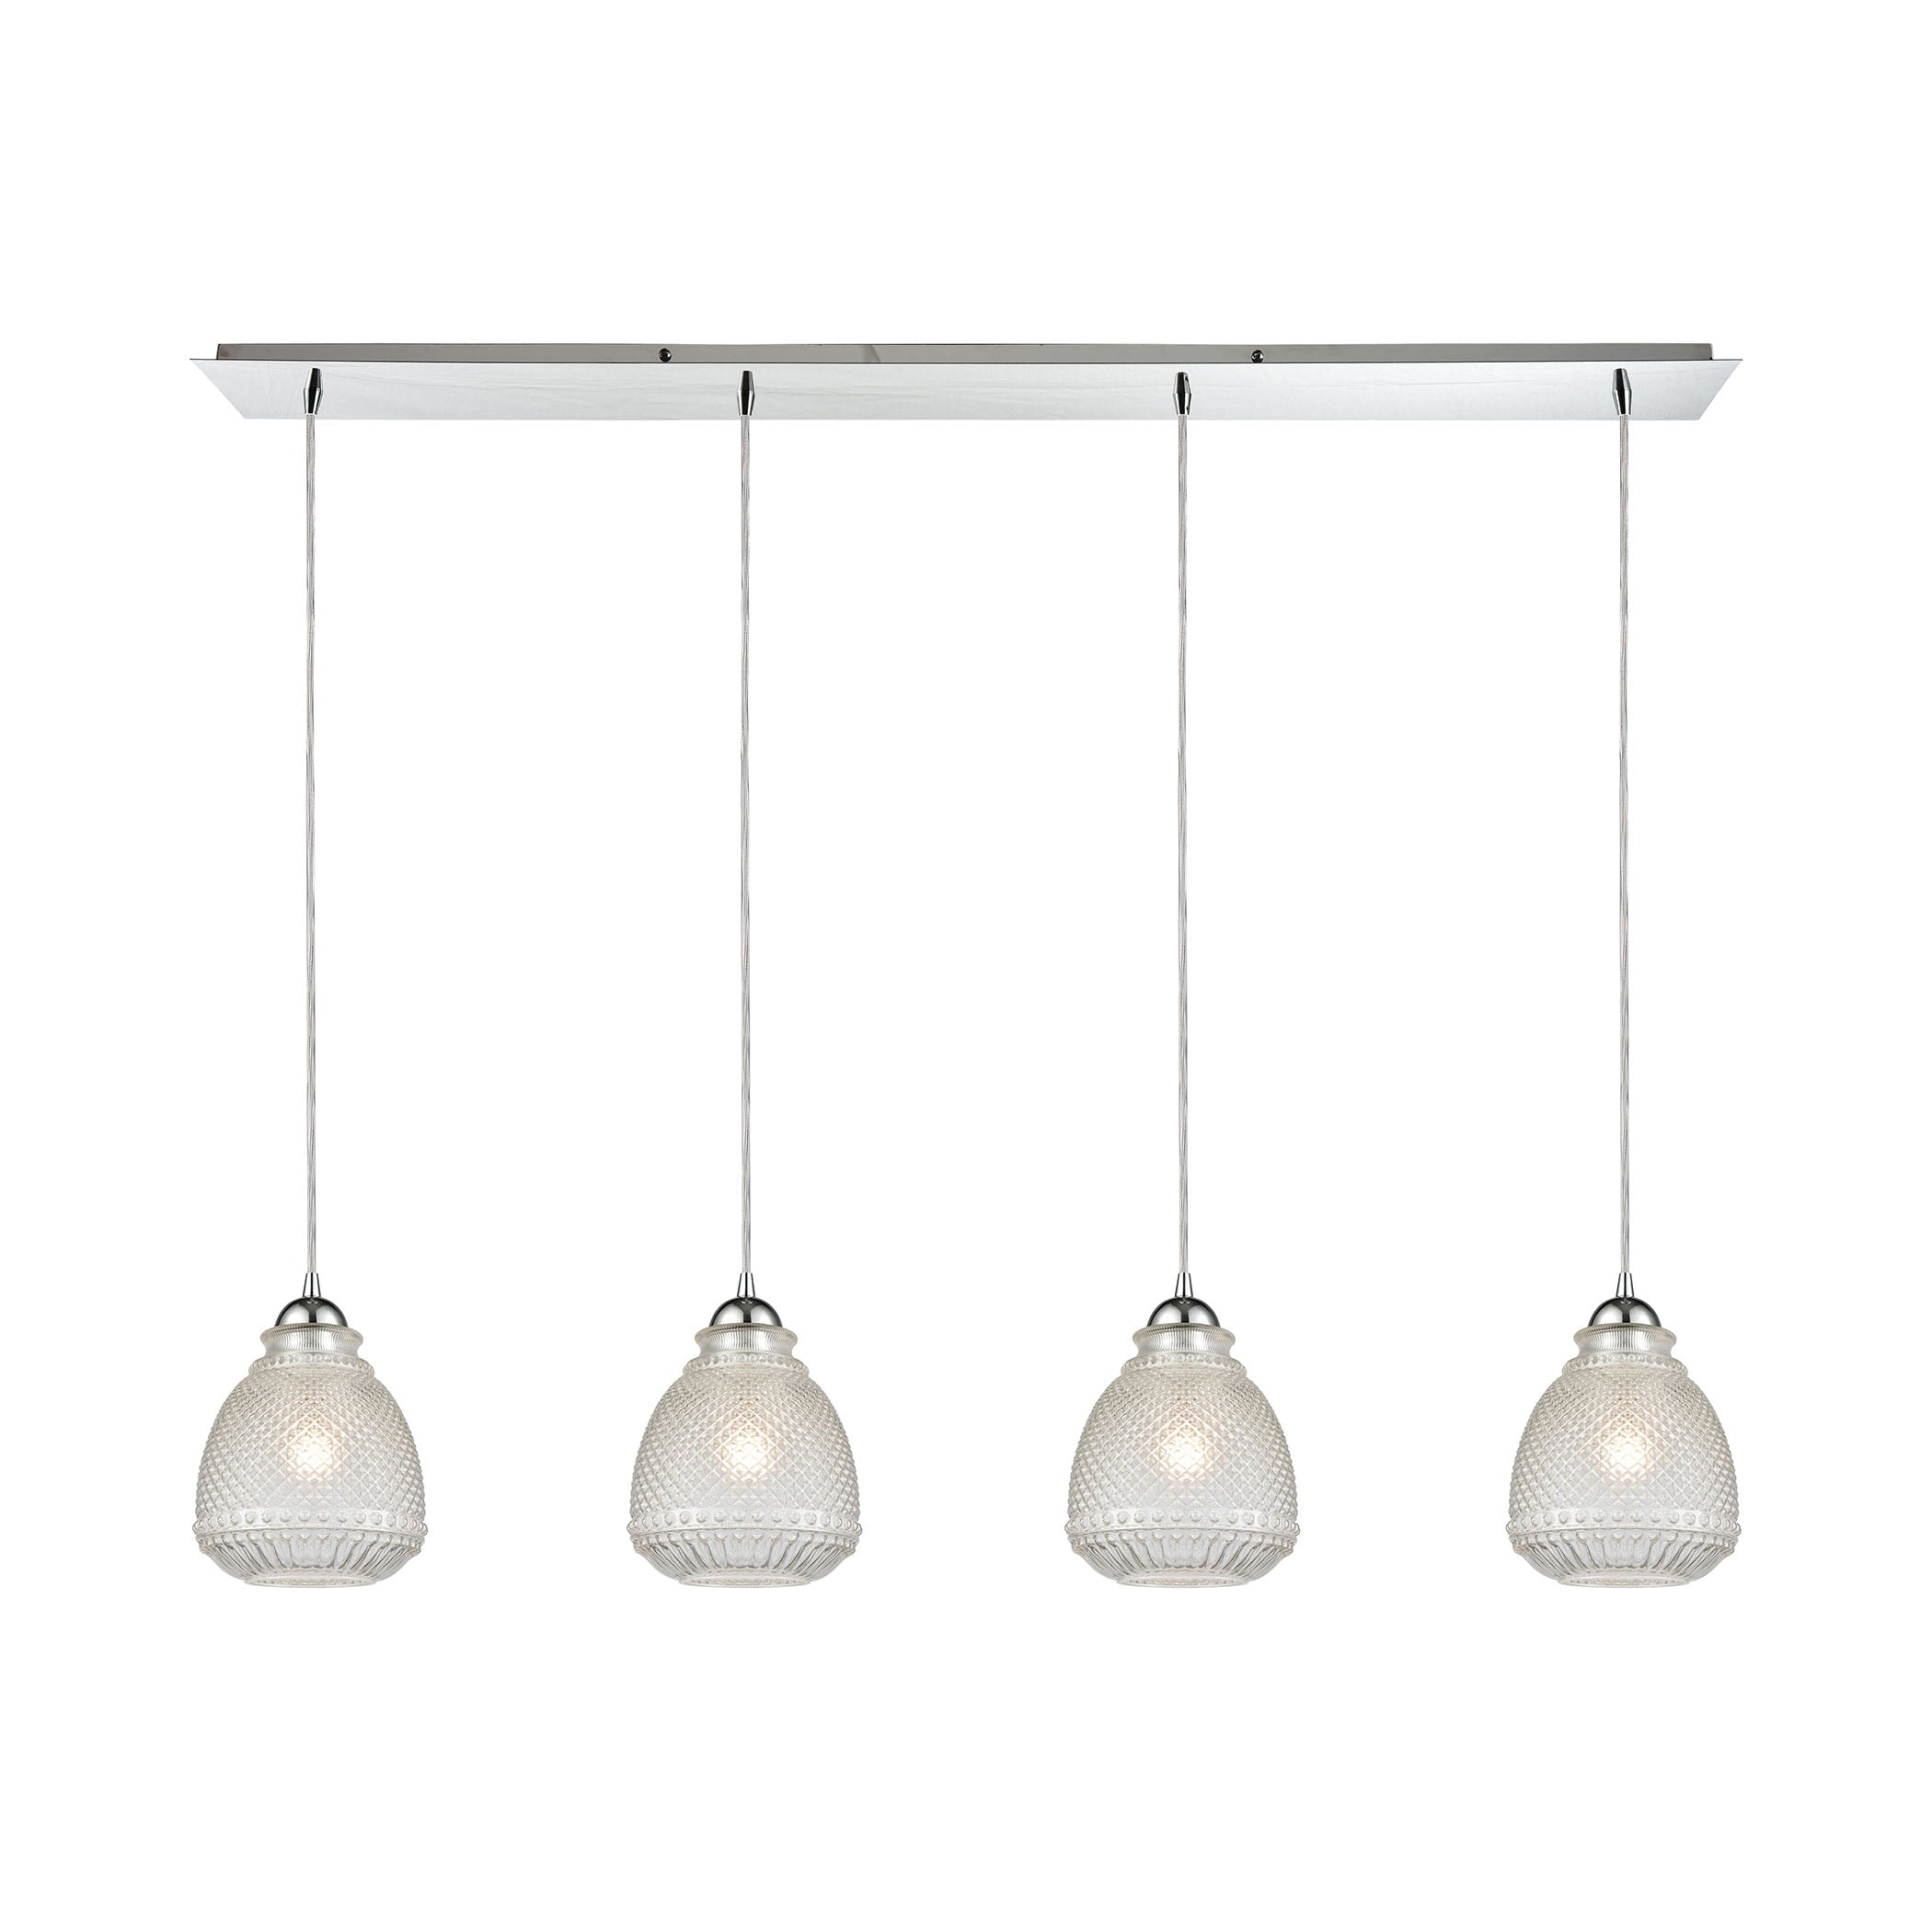 ELK Lighting 56590/4LP Victoriana 4-Light Linear Pendant Fixture in Polished Chrome with Clear Crosshatched Glass